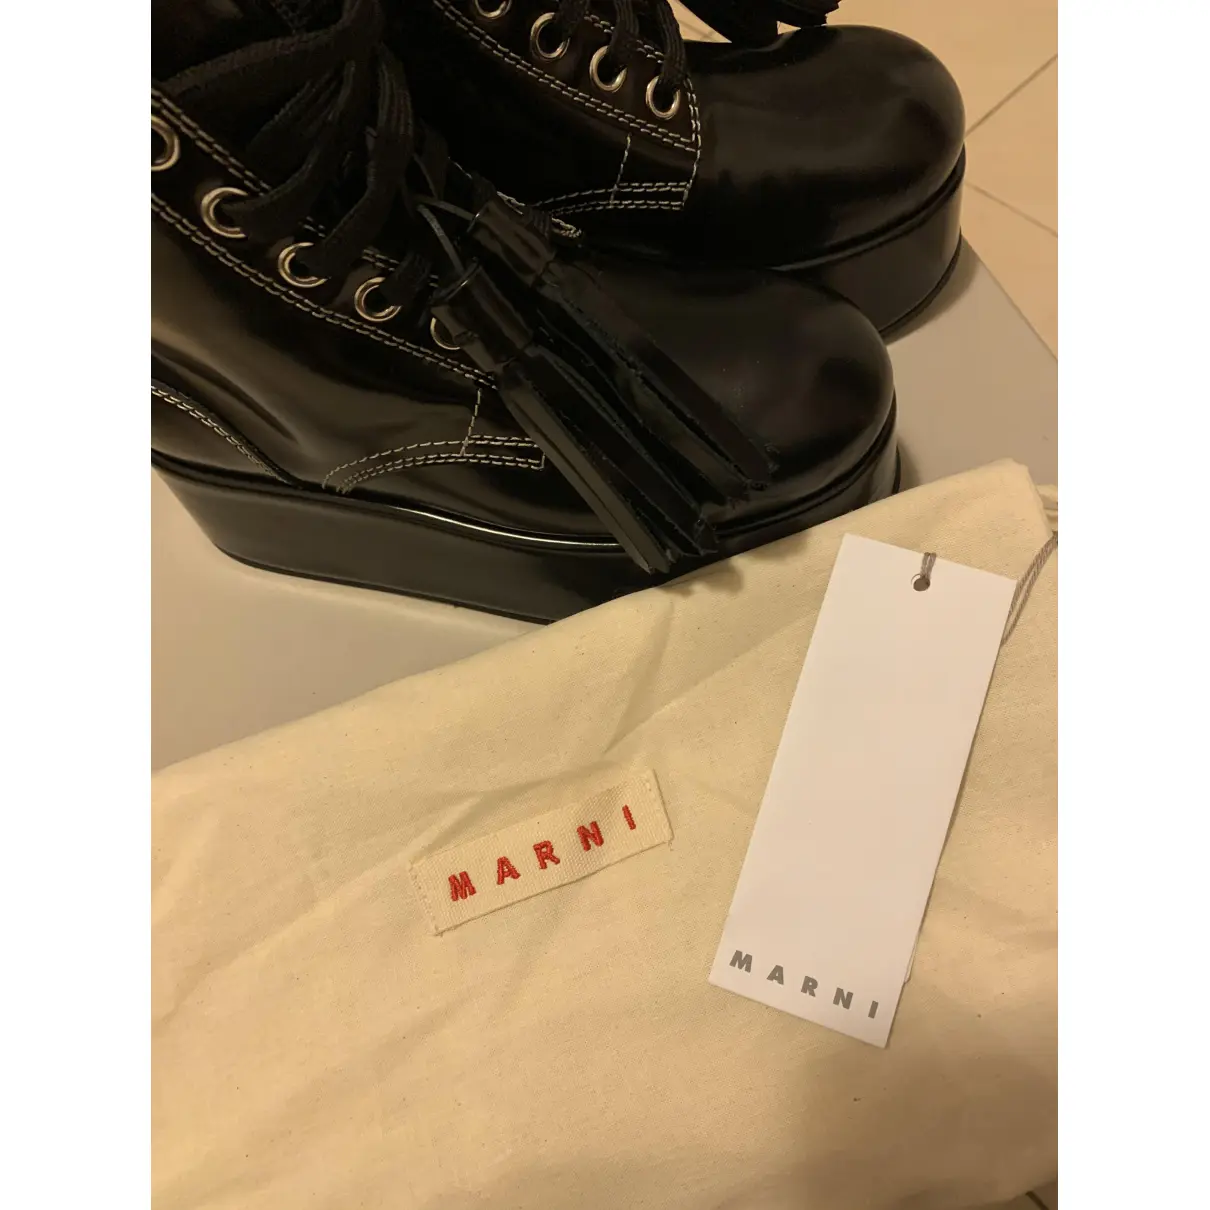 Buy Marni Leather lace up boots online